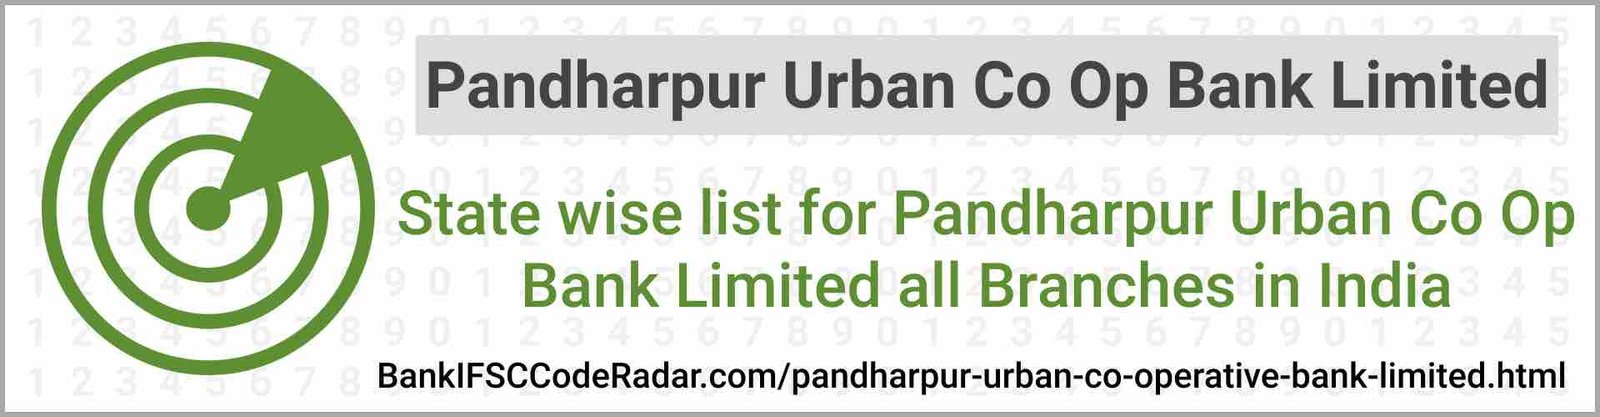 Pandharpur Urban Co Operative Bank Limited All Branches India